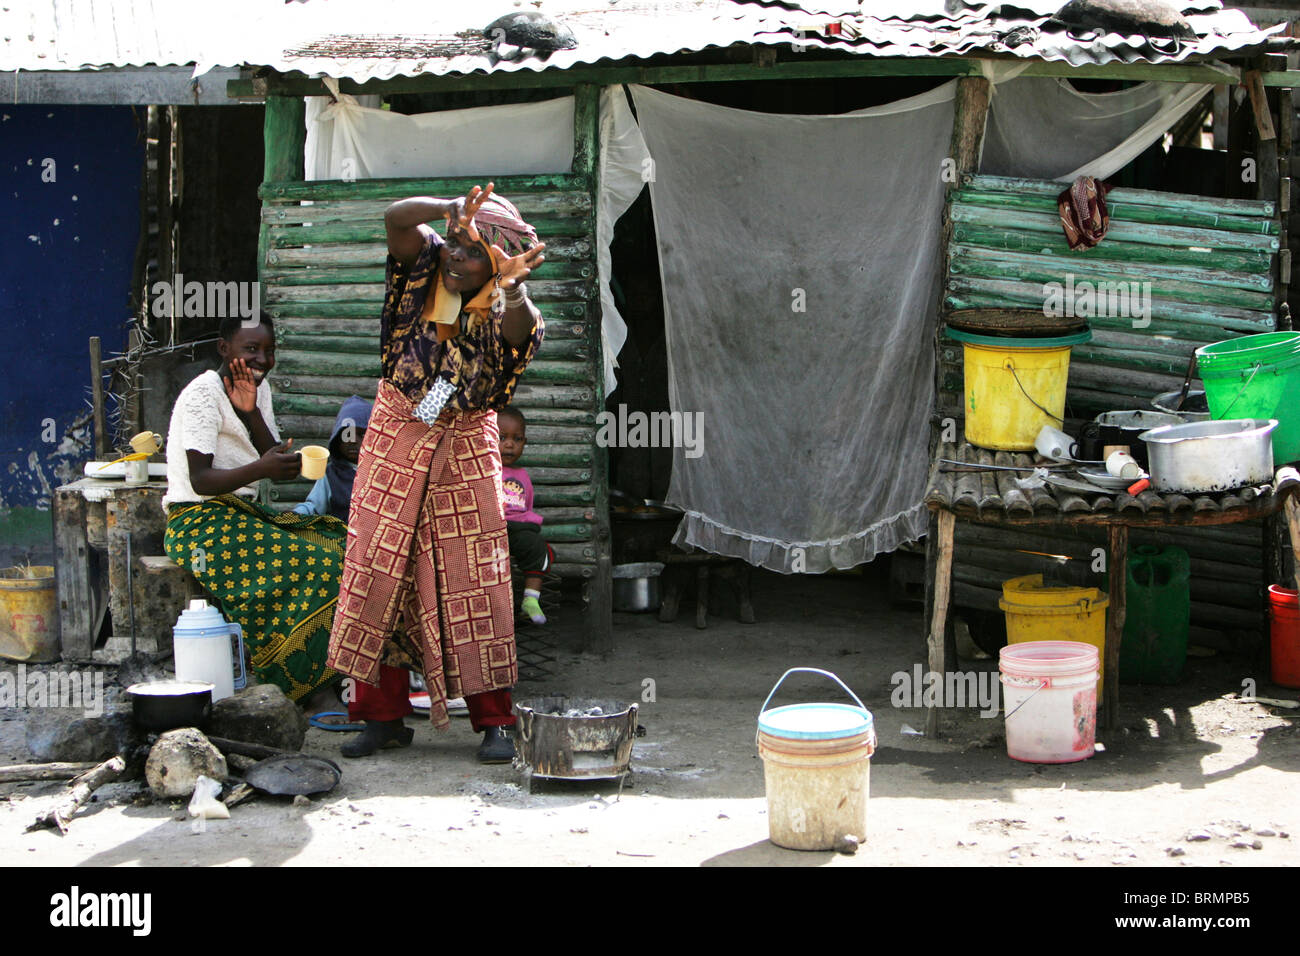 Two woman with two young children outside their makeshift dwelling Stock Photo